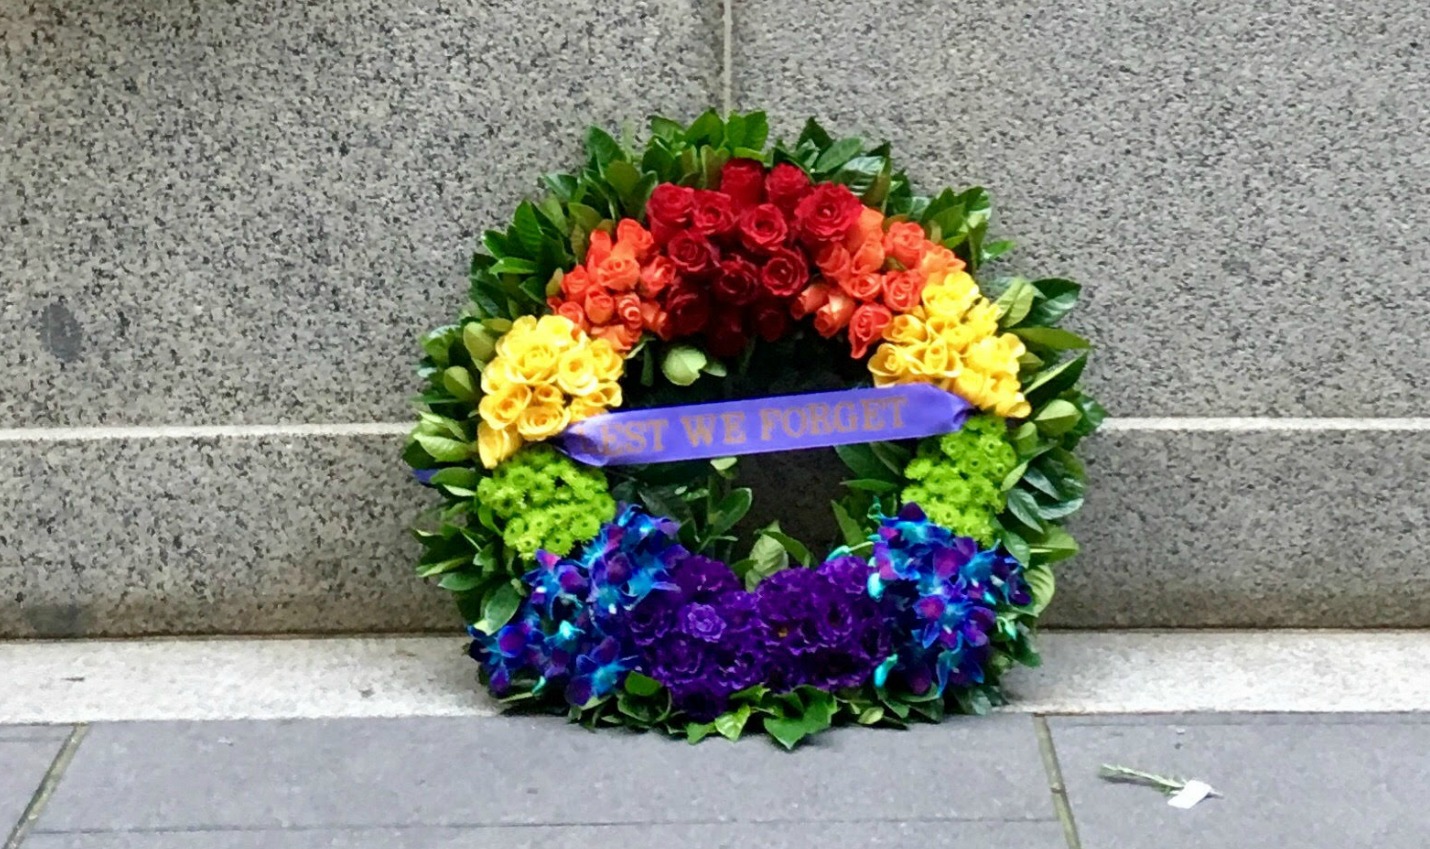 Rainbow wreath laid for LGBTI soldiers on ANZAC Day